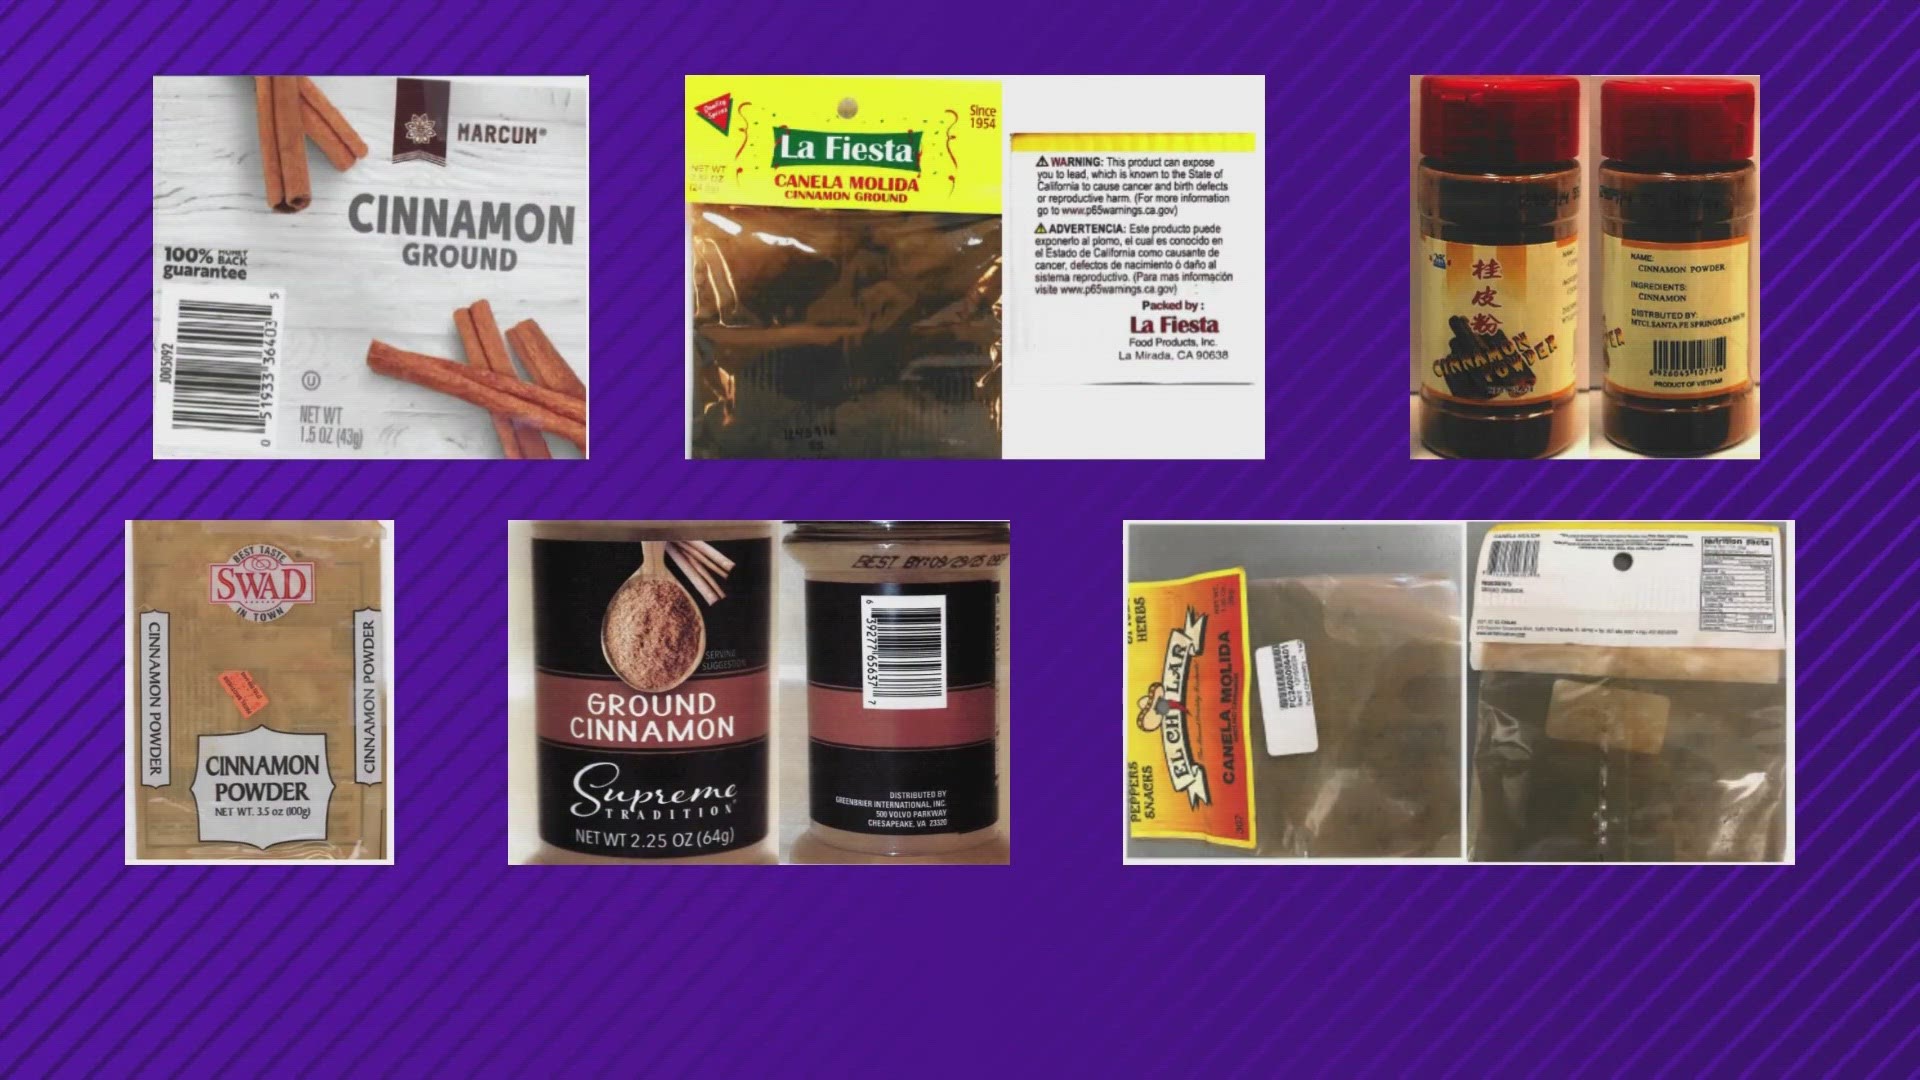 The FDA is advising people to throw away six different brands of ground cinnamon products because of "elevated levels of lead."